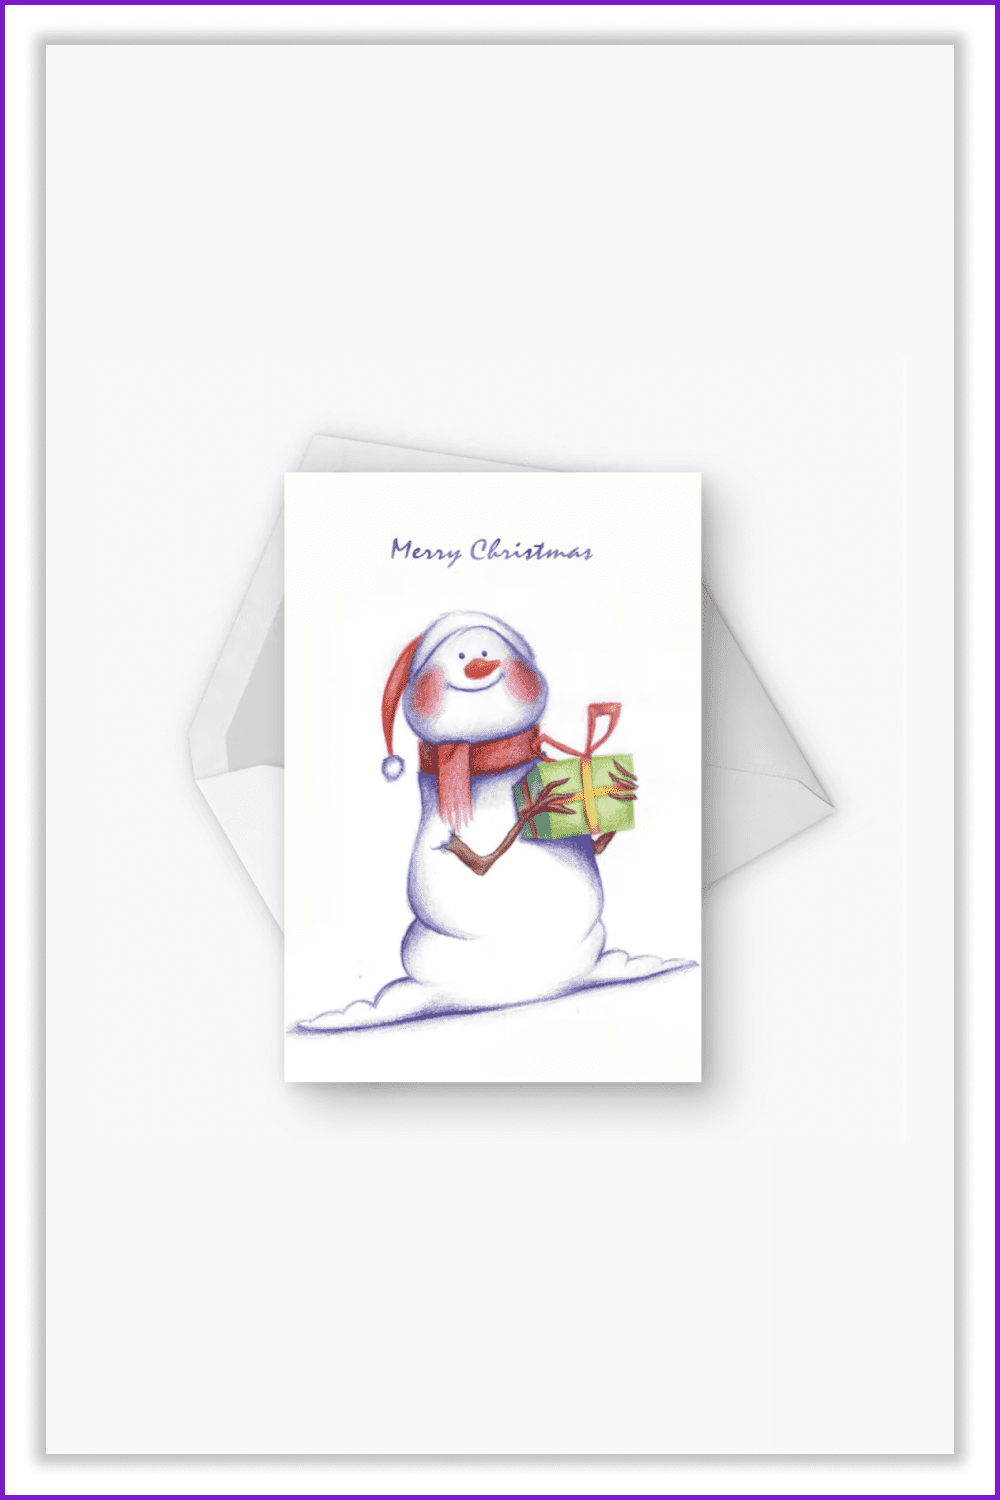 Greeting card with a cute drawn snowman with a gift in his hands.